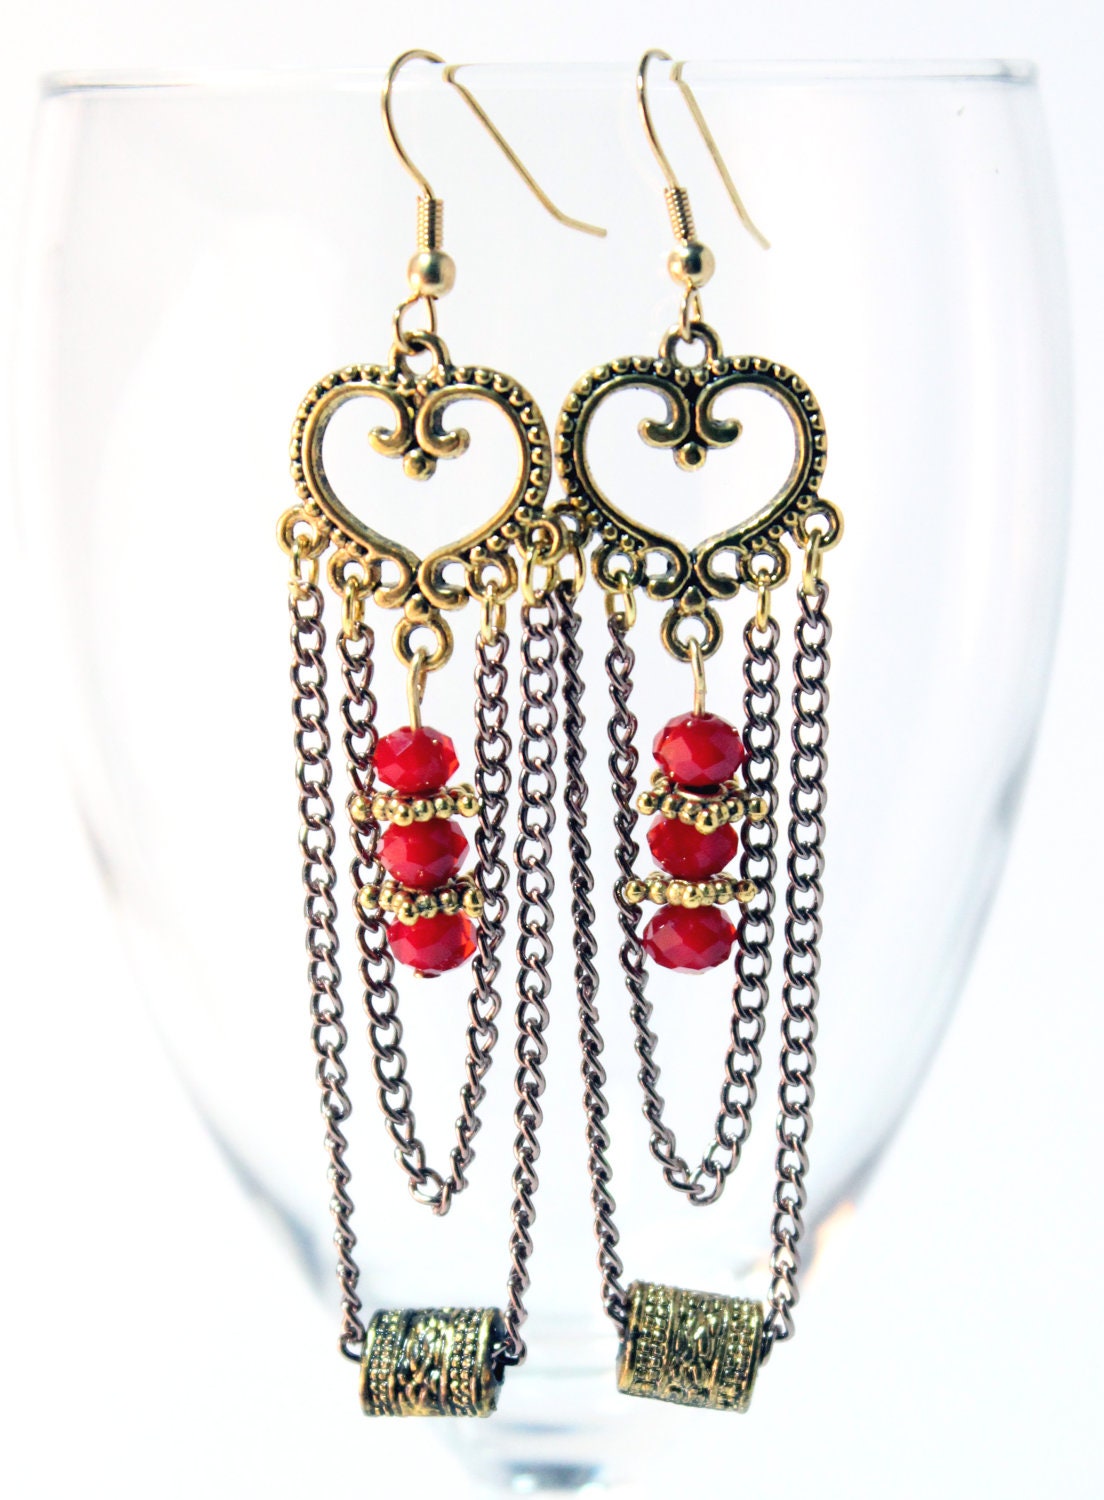 Chandelier Style Heart With Red Crystal Ear Dangles